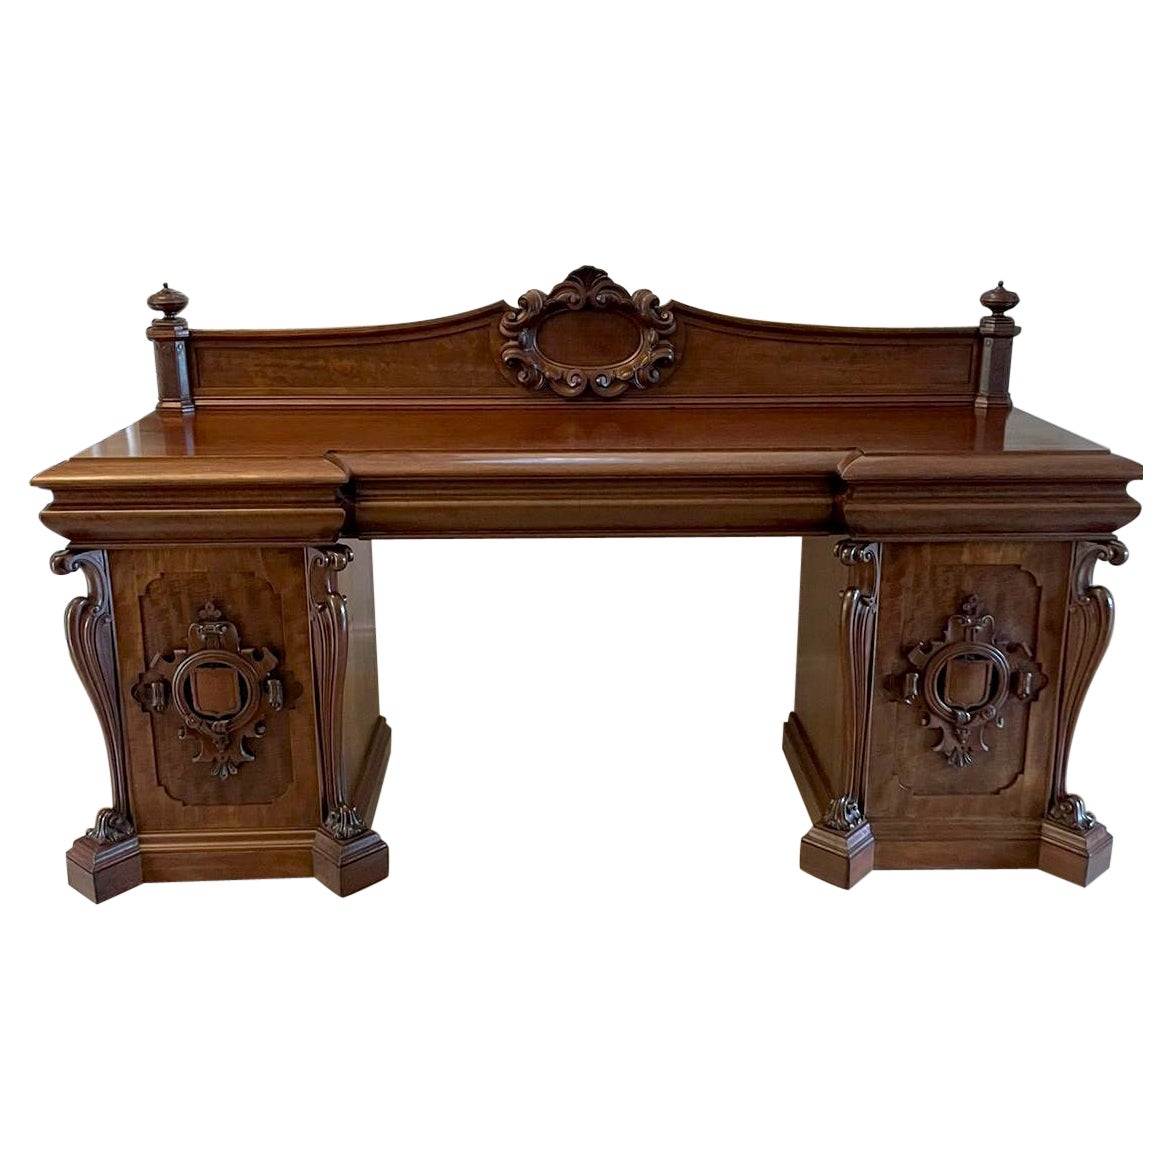 Large Magnificent Antique William IV Carved Mahogany Sideboard For Sale